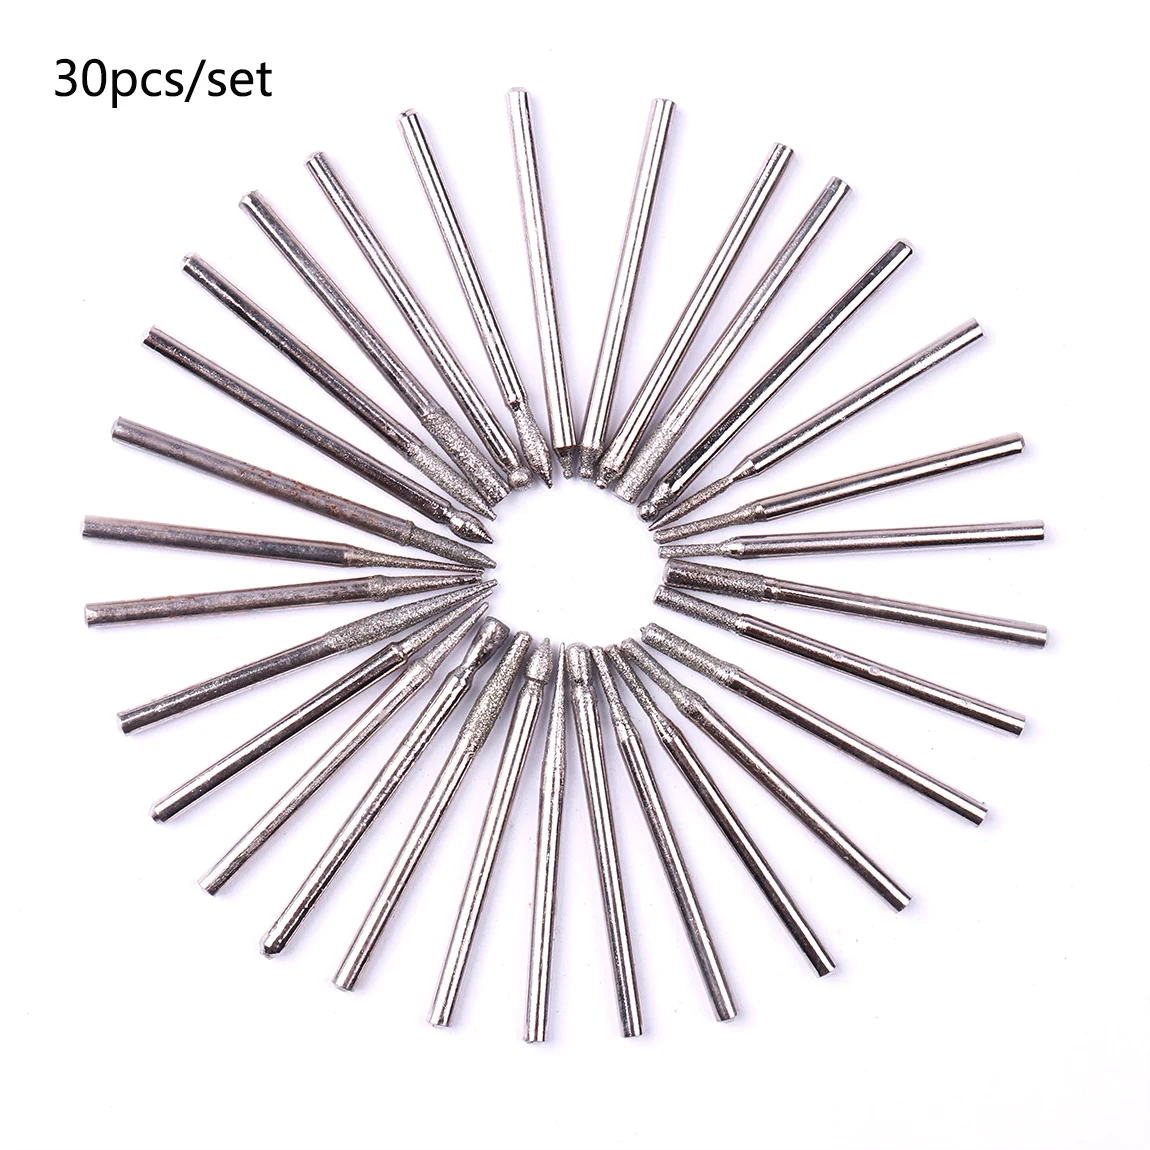 CHEERBRIGHT 30Pc Diamond Coated Cuticle Removal Nail Drill Set Rotary Grinding Burrs Glass Drill Bit DIYTool Set diy point drill tool kit elbow point drill luminous cushion decorative nail pen drill set lamp quick set diamond stationery p3d6